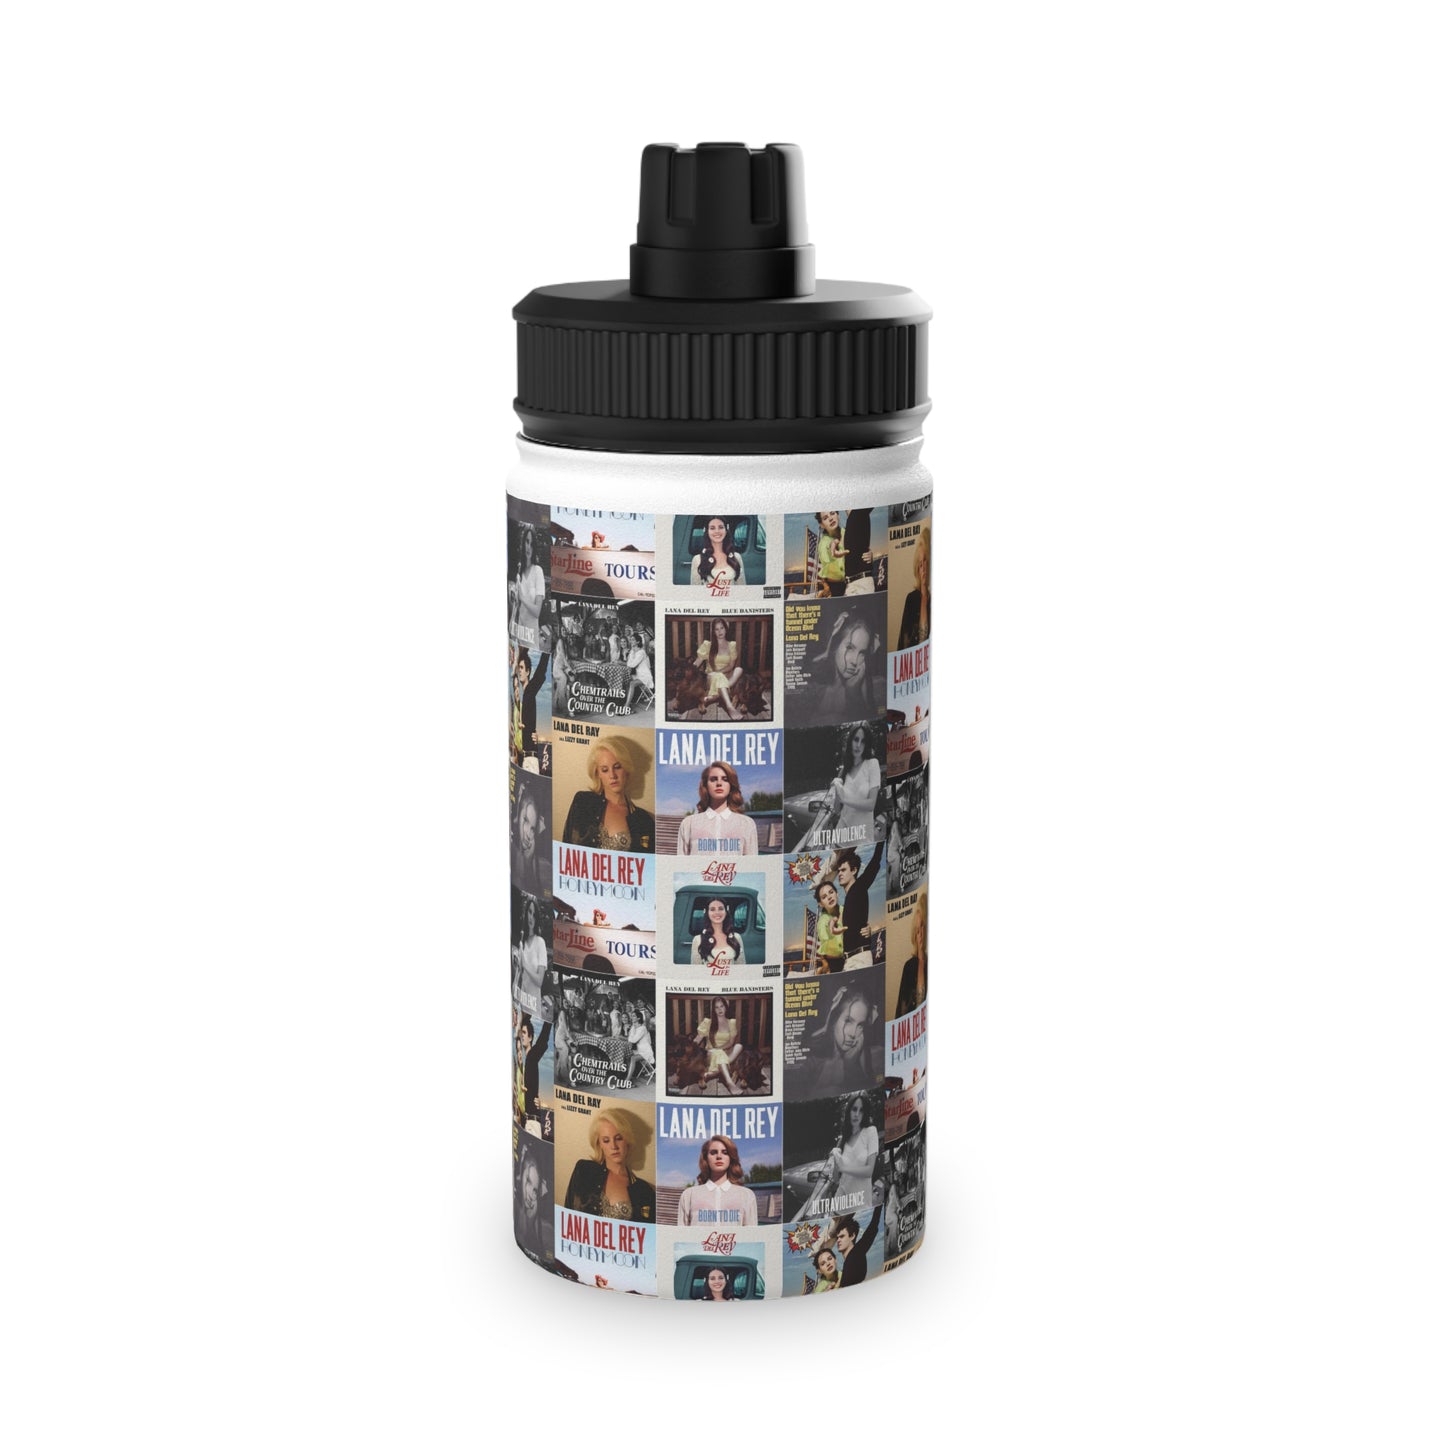 Lana Del Rey Album Cover Collage Stainless Steel Sports Lid Water Bottle